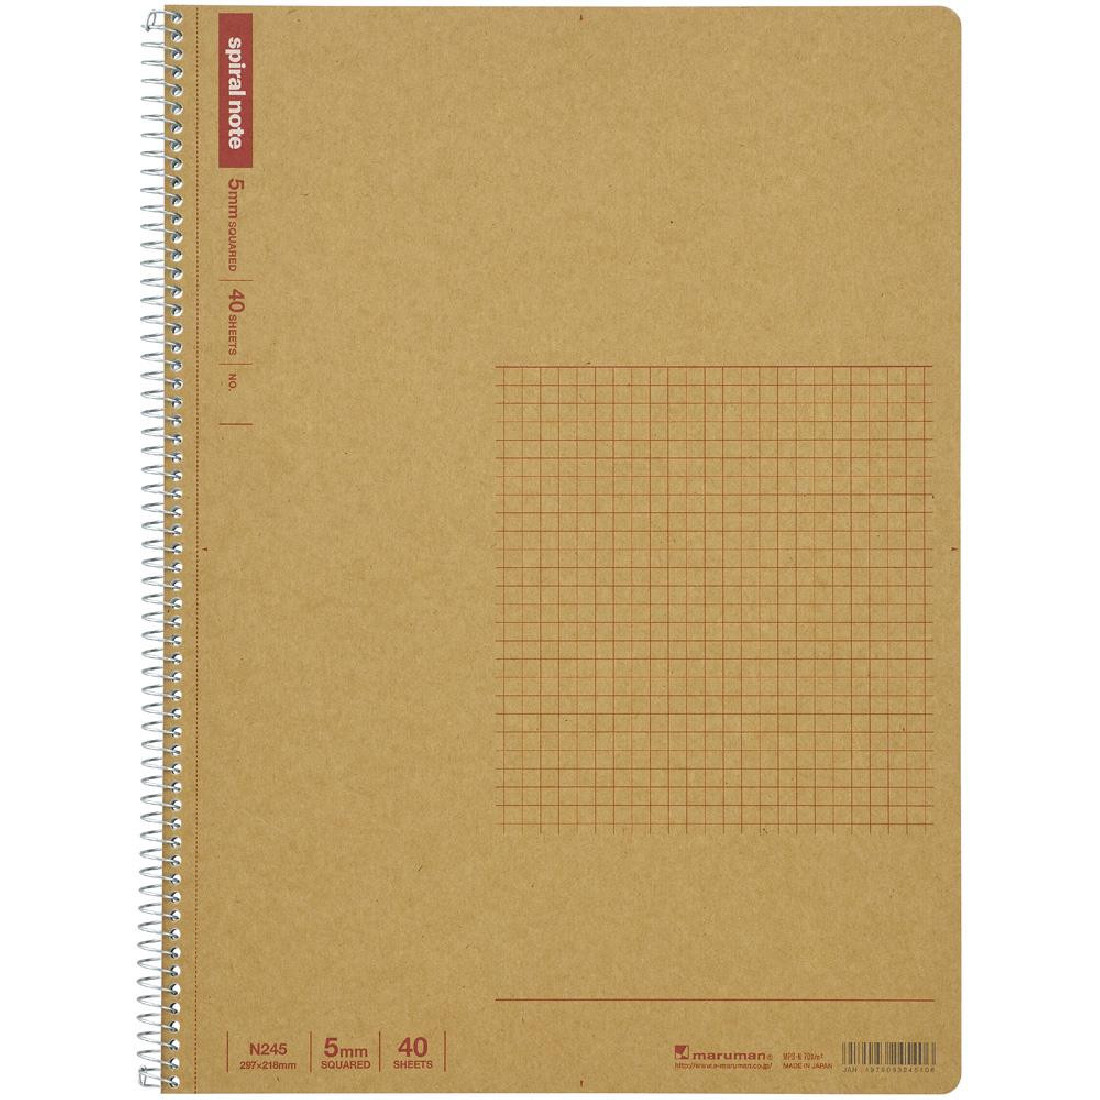 Maruman A4 spiral notebook squared paper 40 sheets N245